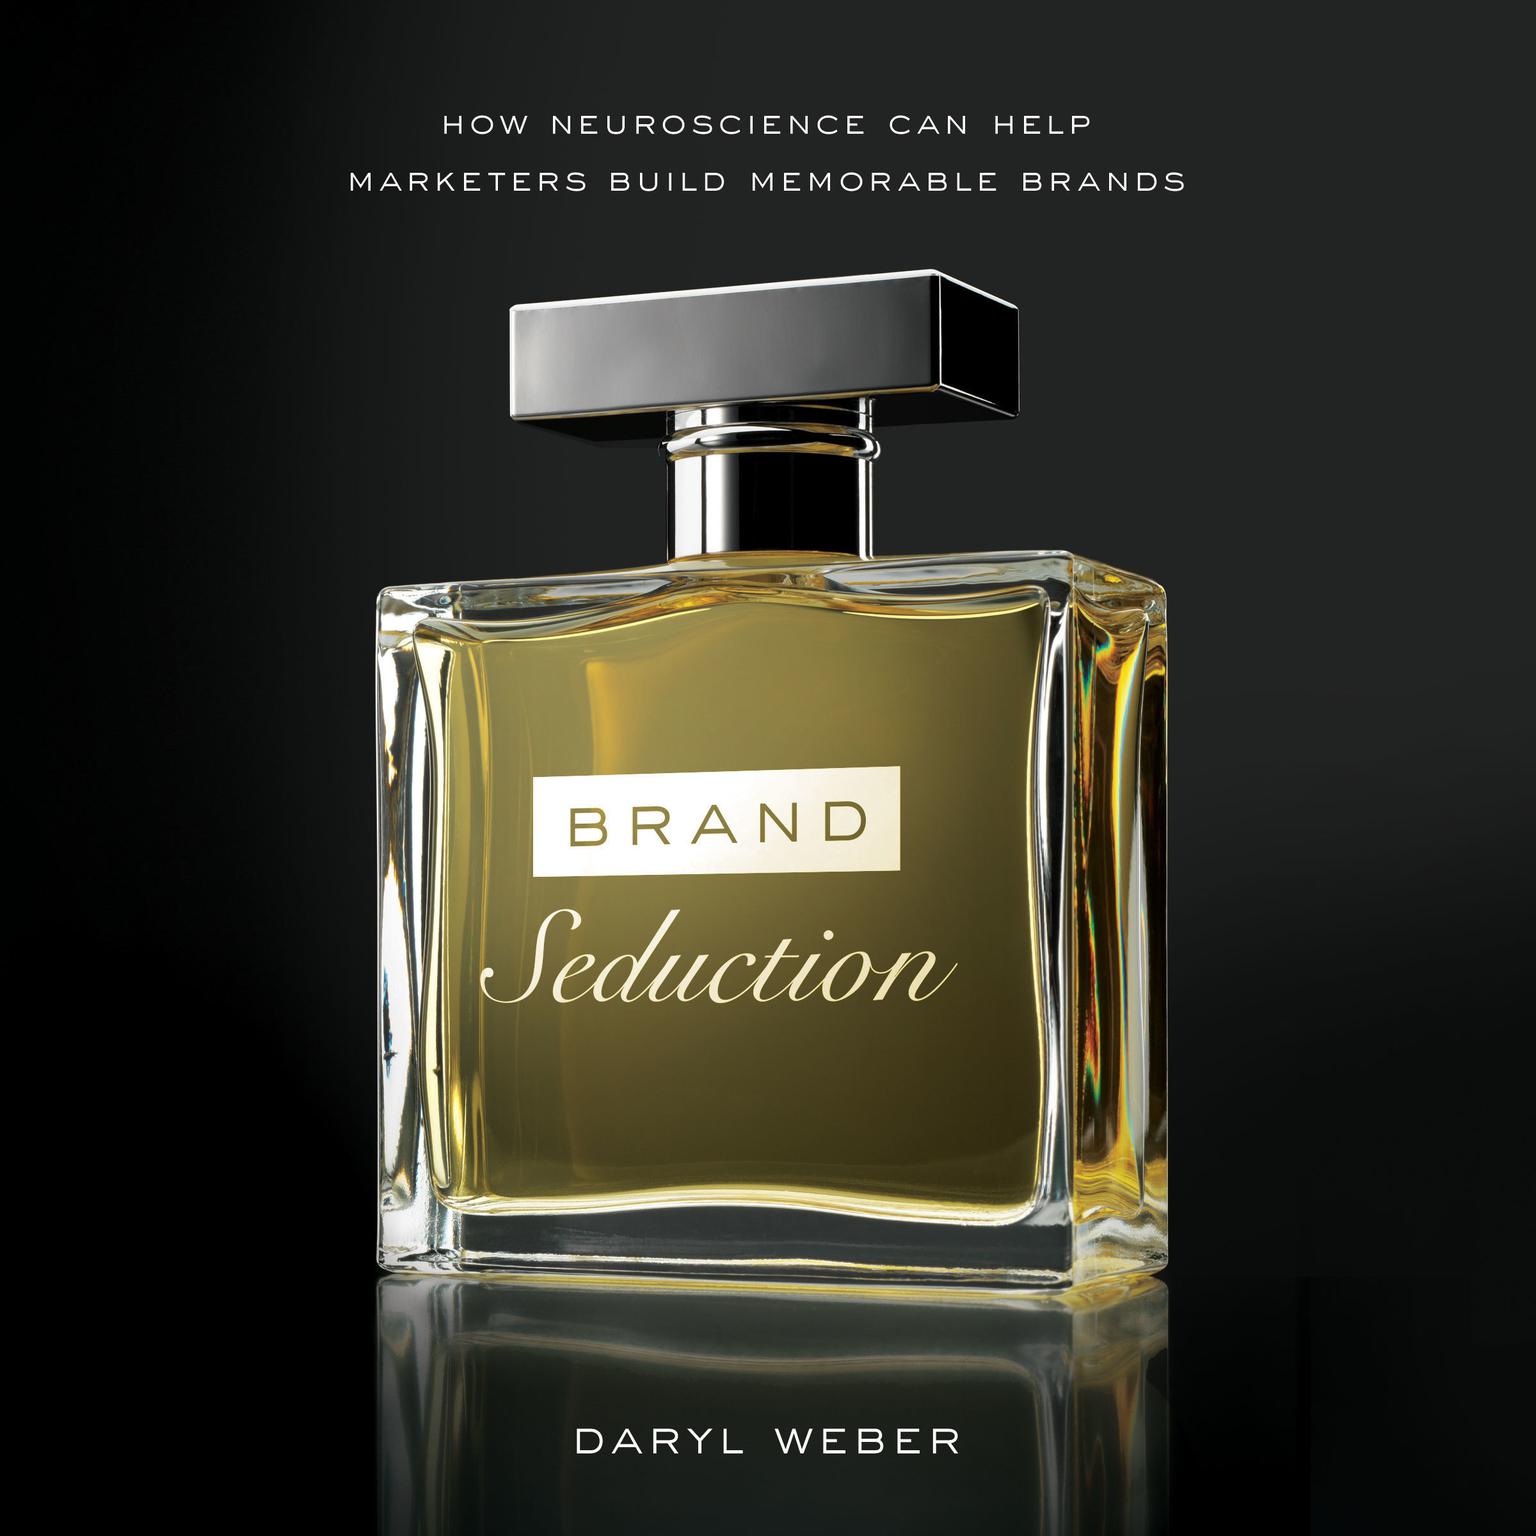 Brand Seduction: How Neuroscience Can Help Marketers Build Memorable Brands Audiobook, by Daryl Weber